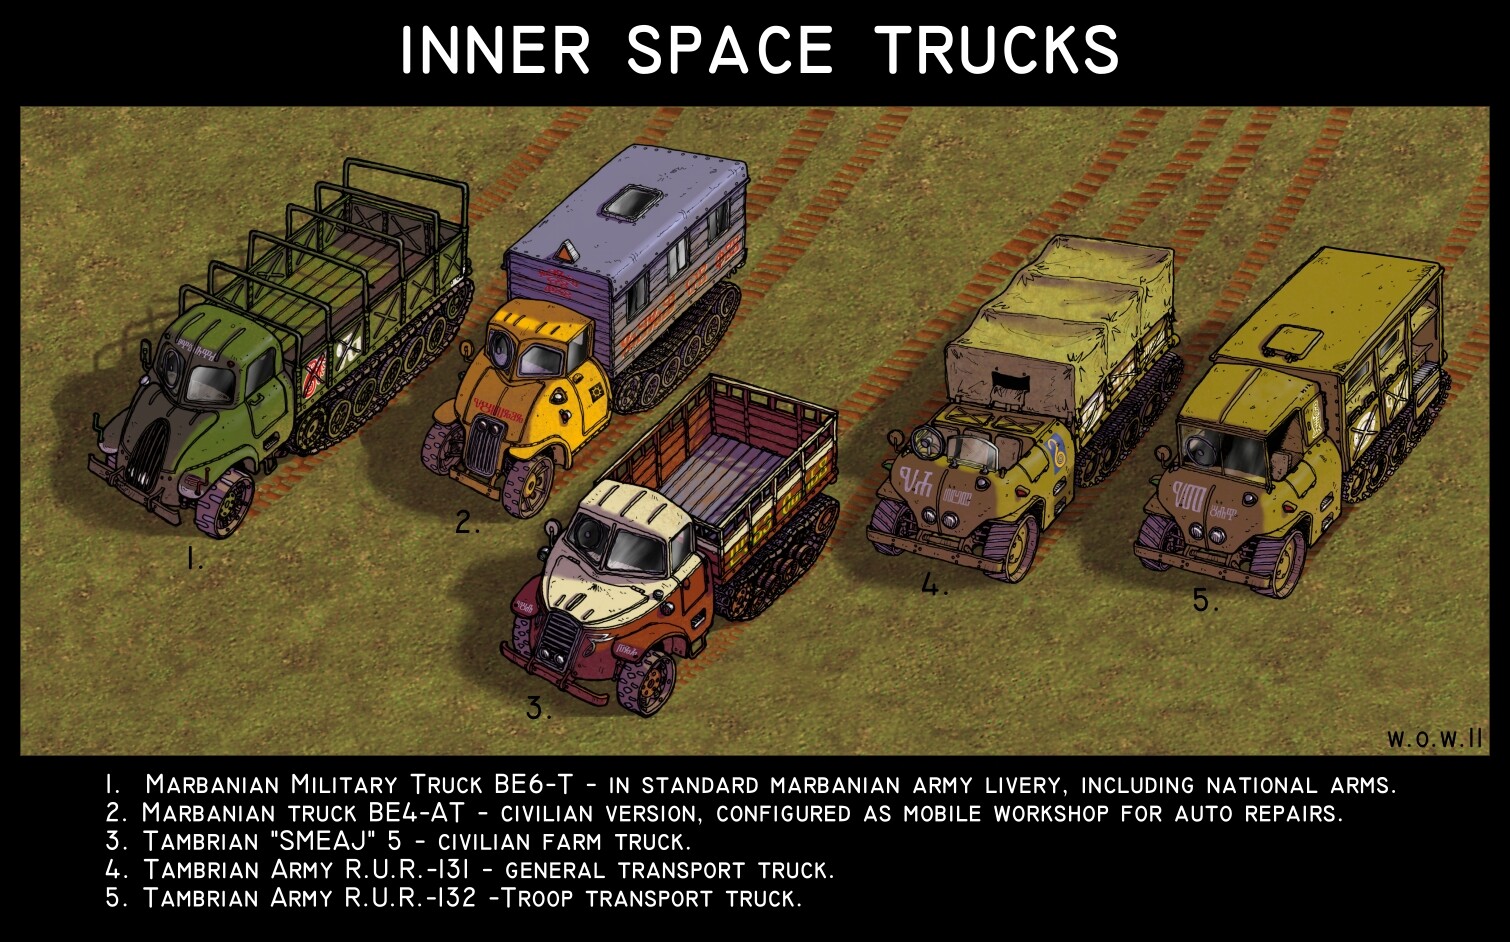 Truck designs, both civilian and military. 